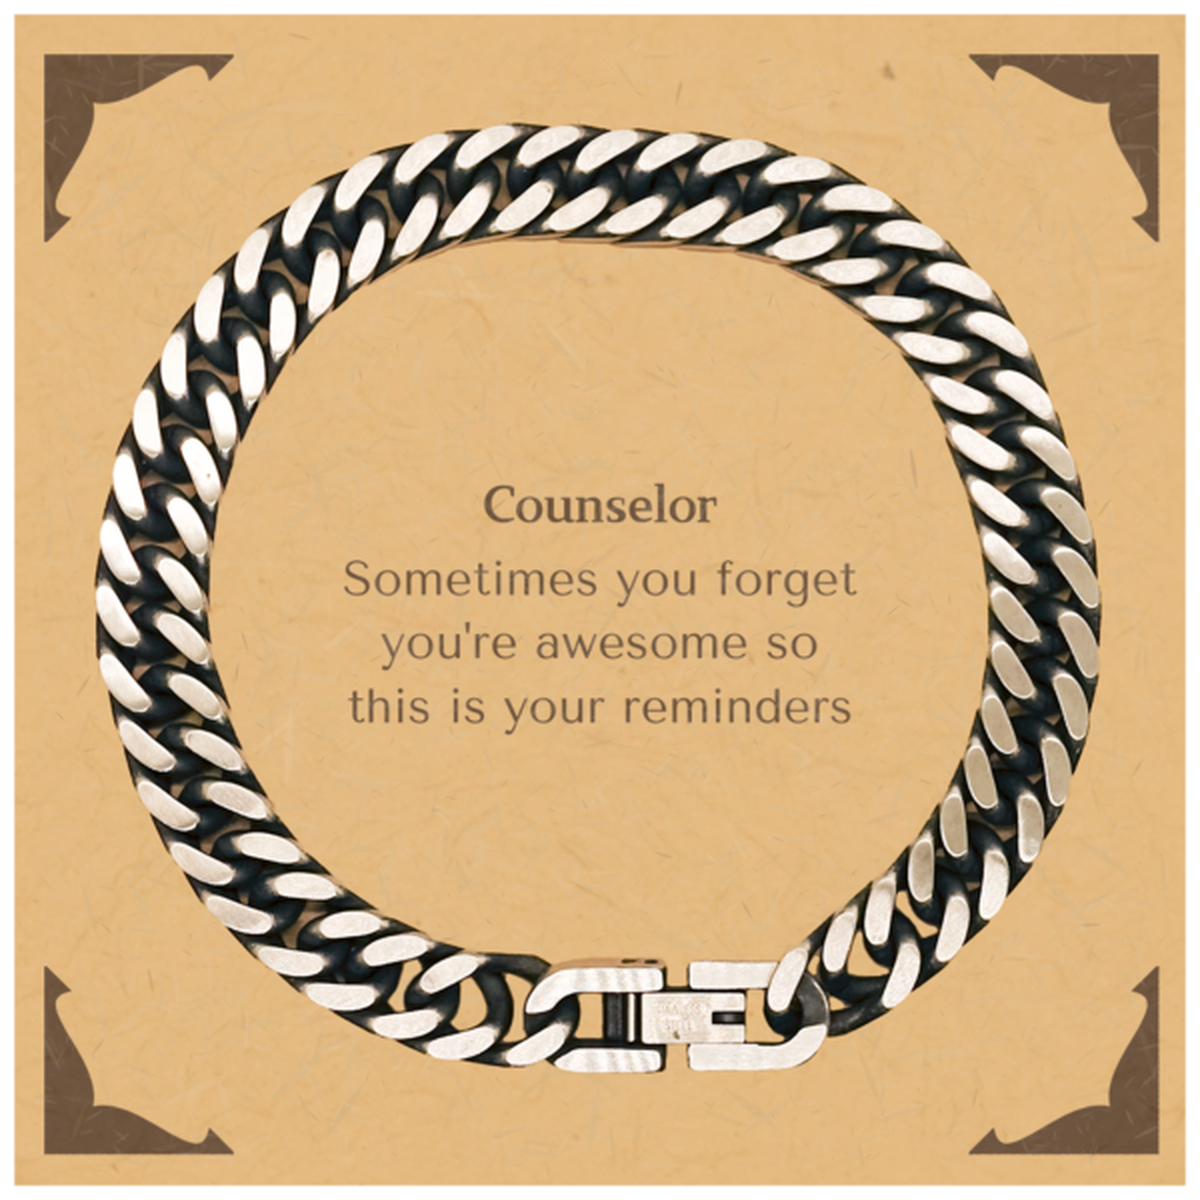 Sentimental Counselor Cuban Link Chain Bracelet, Counselor Sometimes you forget you're awesome so this is your reminders, Graduation Christmas Birthday Gifts for Counselor, Men, Women, Coworkers